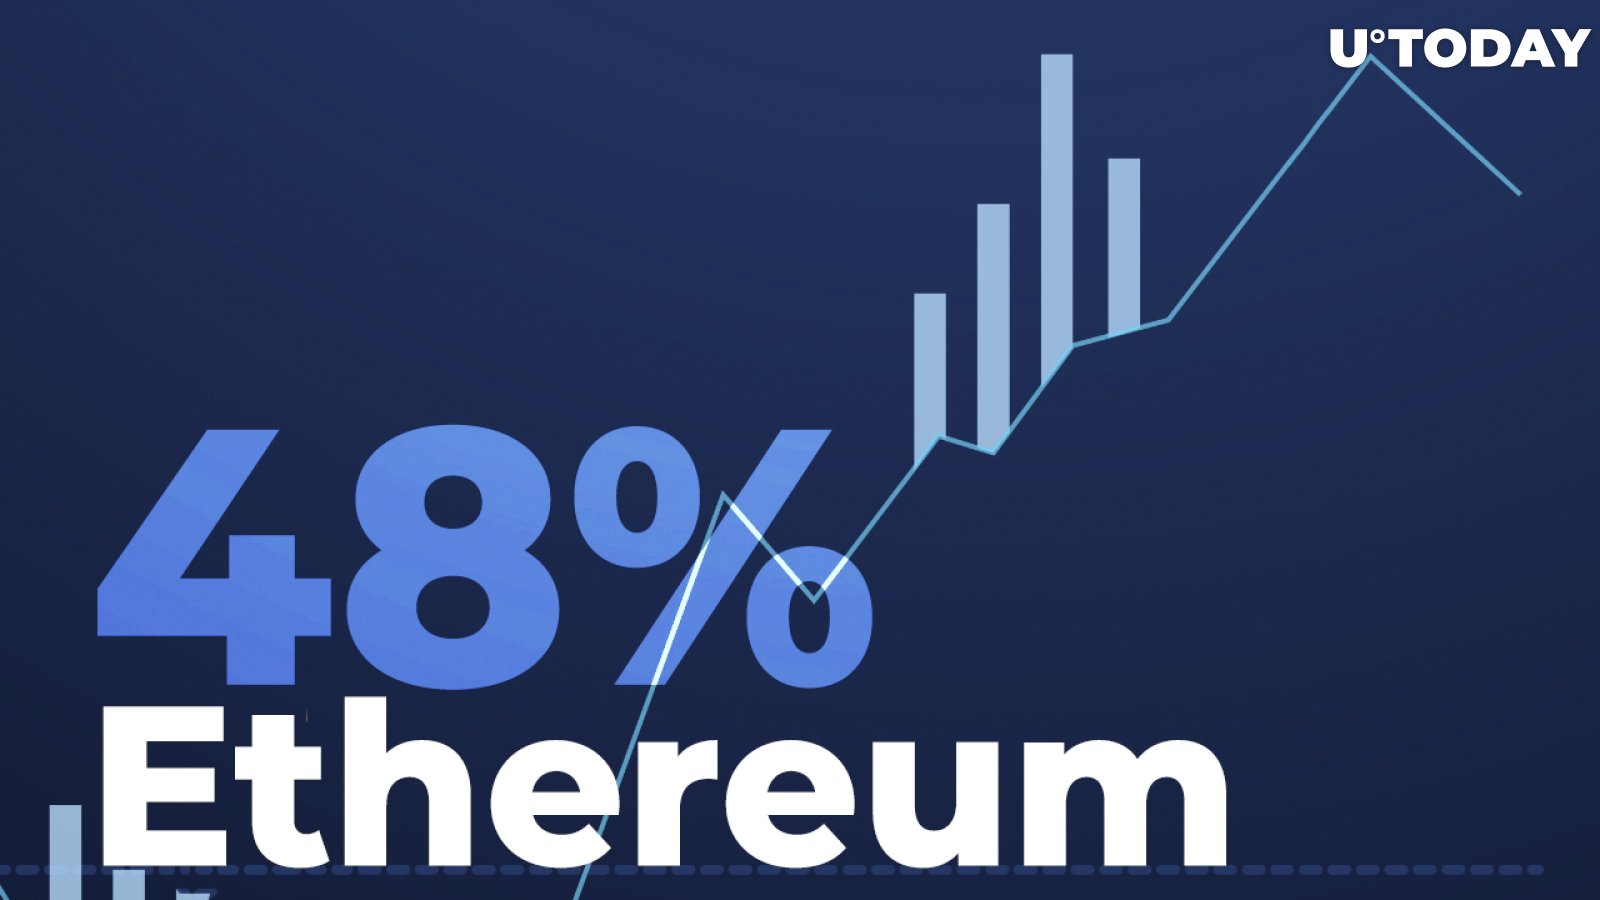 Ethereum Network Activity up 48% Following Coin's 50% Rally